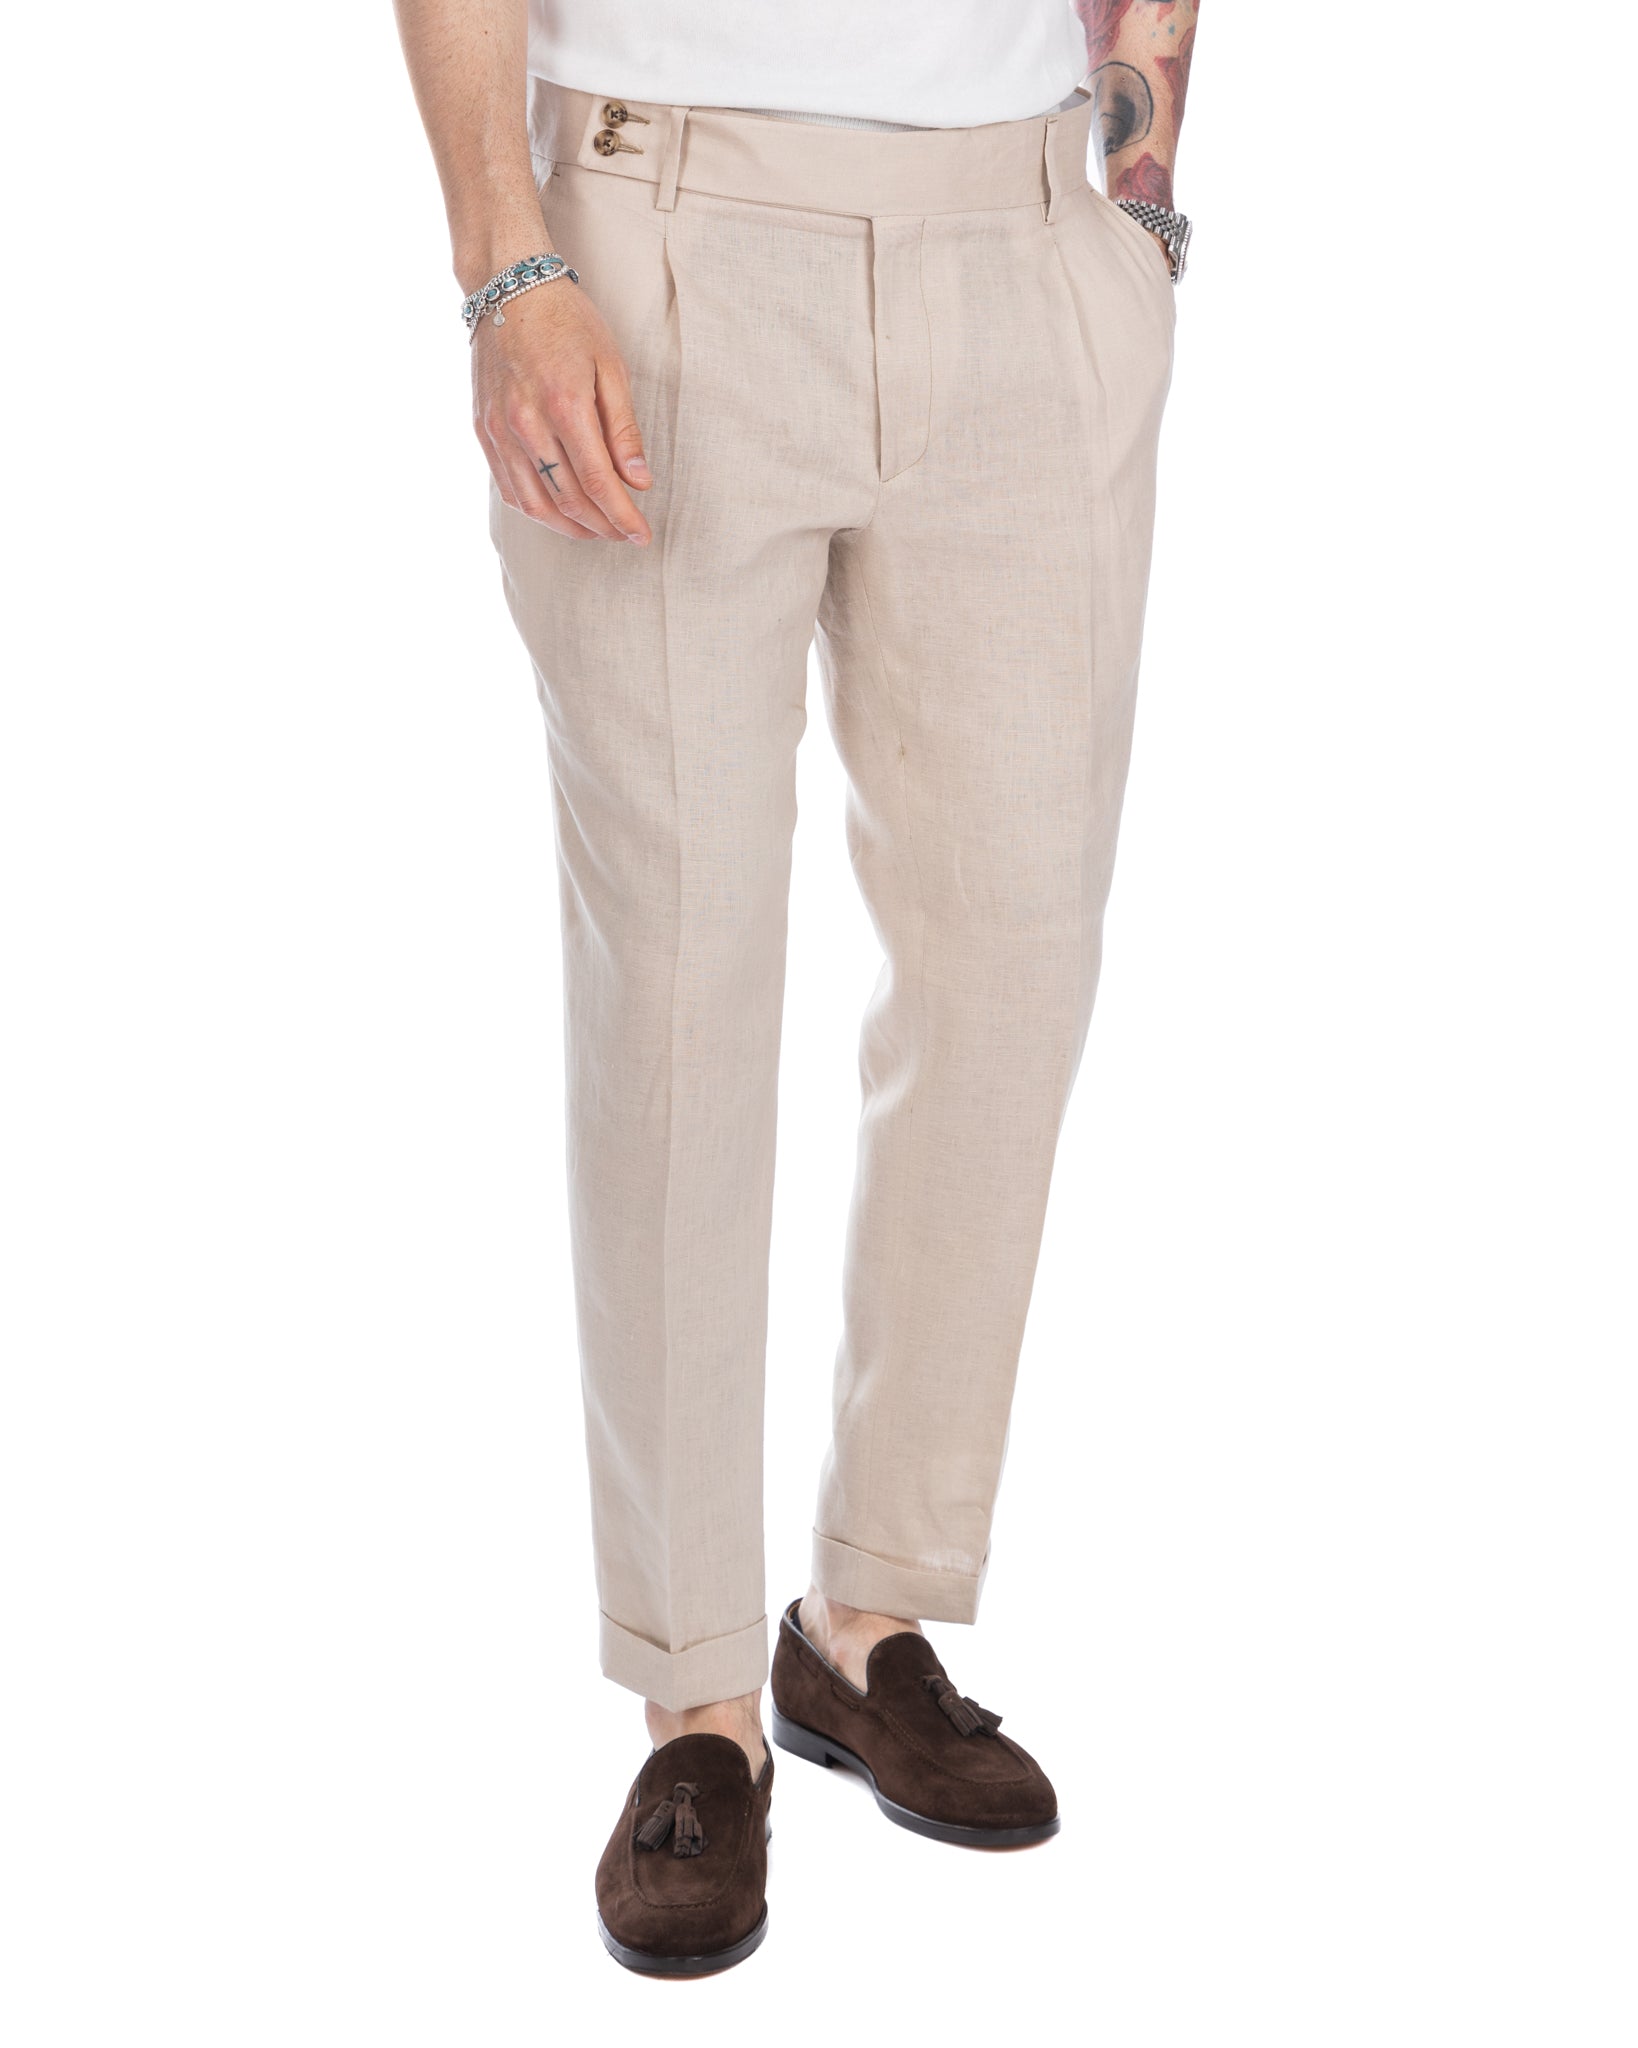 Sorso - high-waisted trousers in pure linen